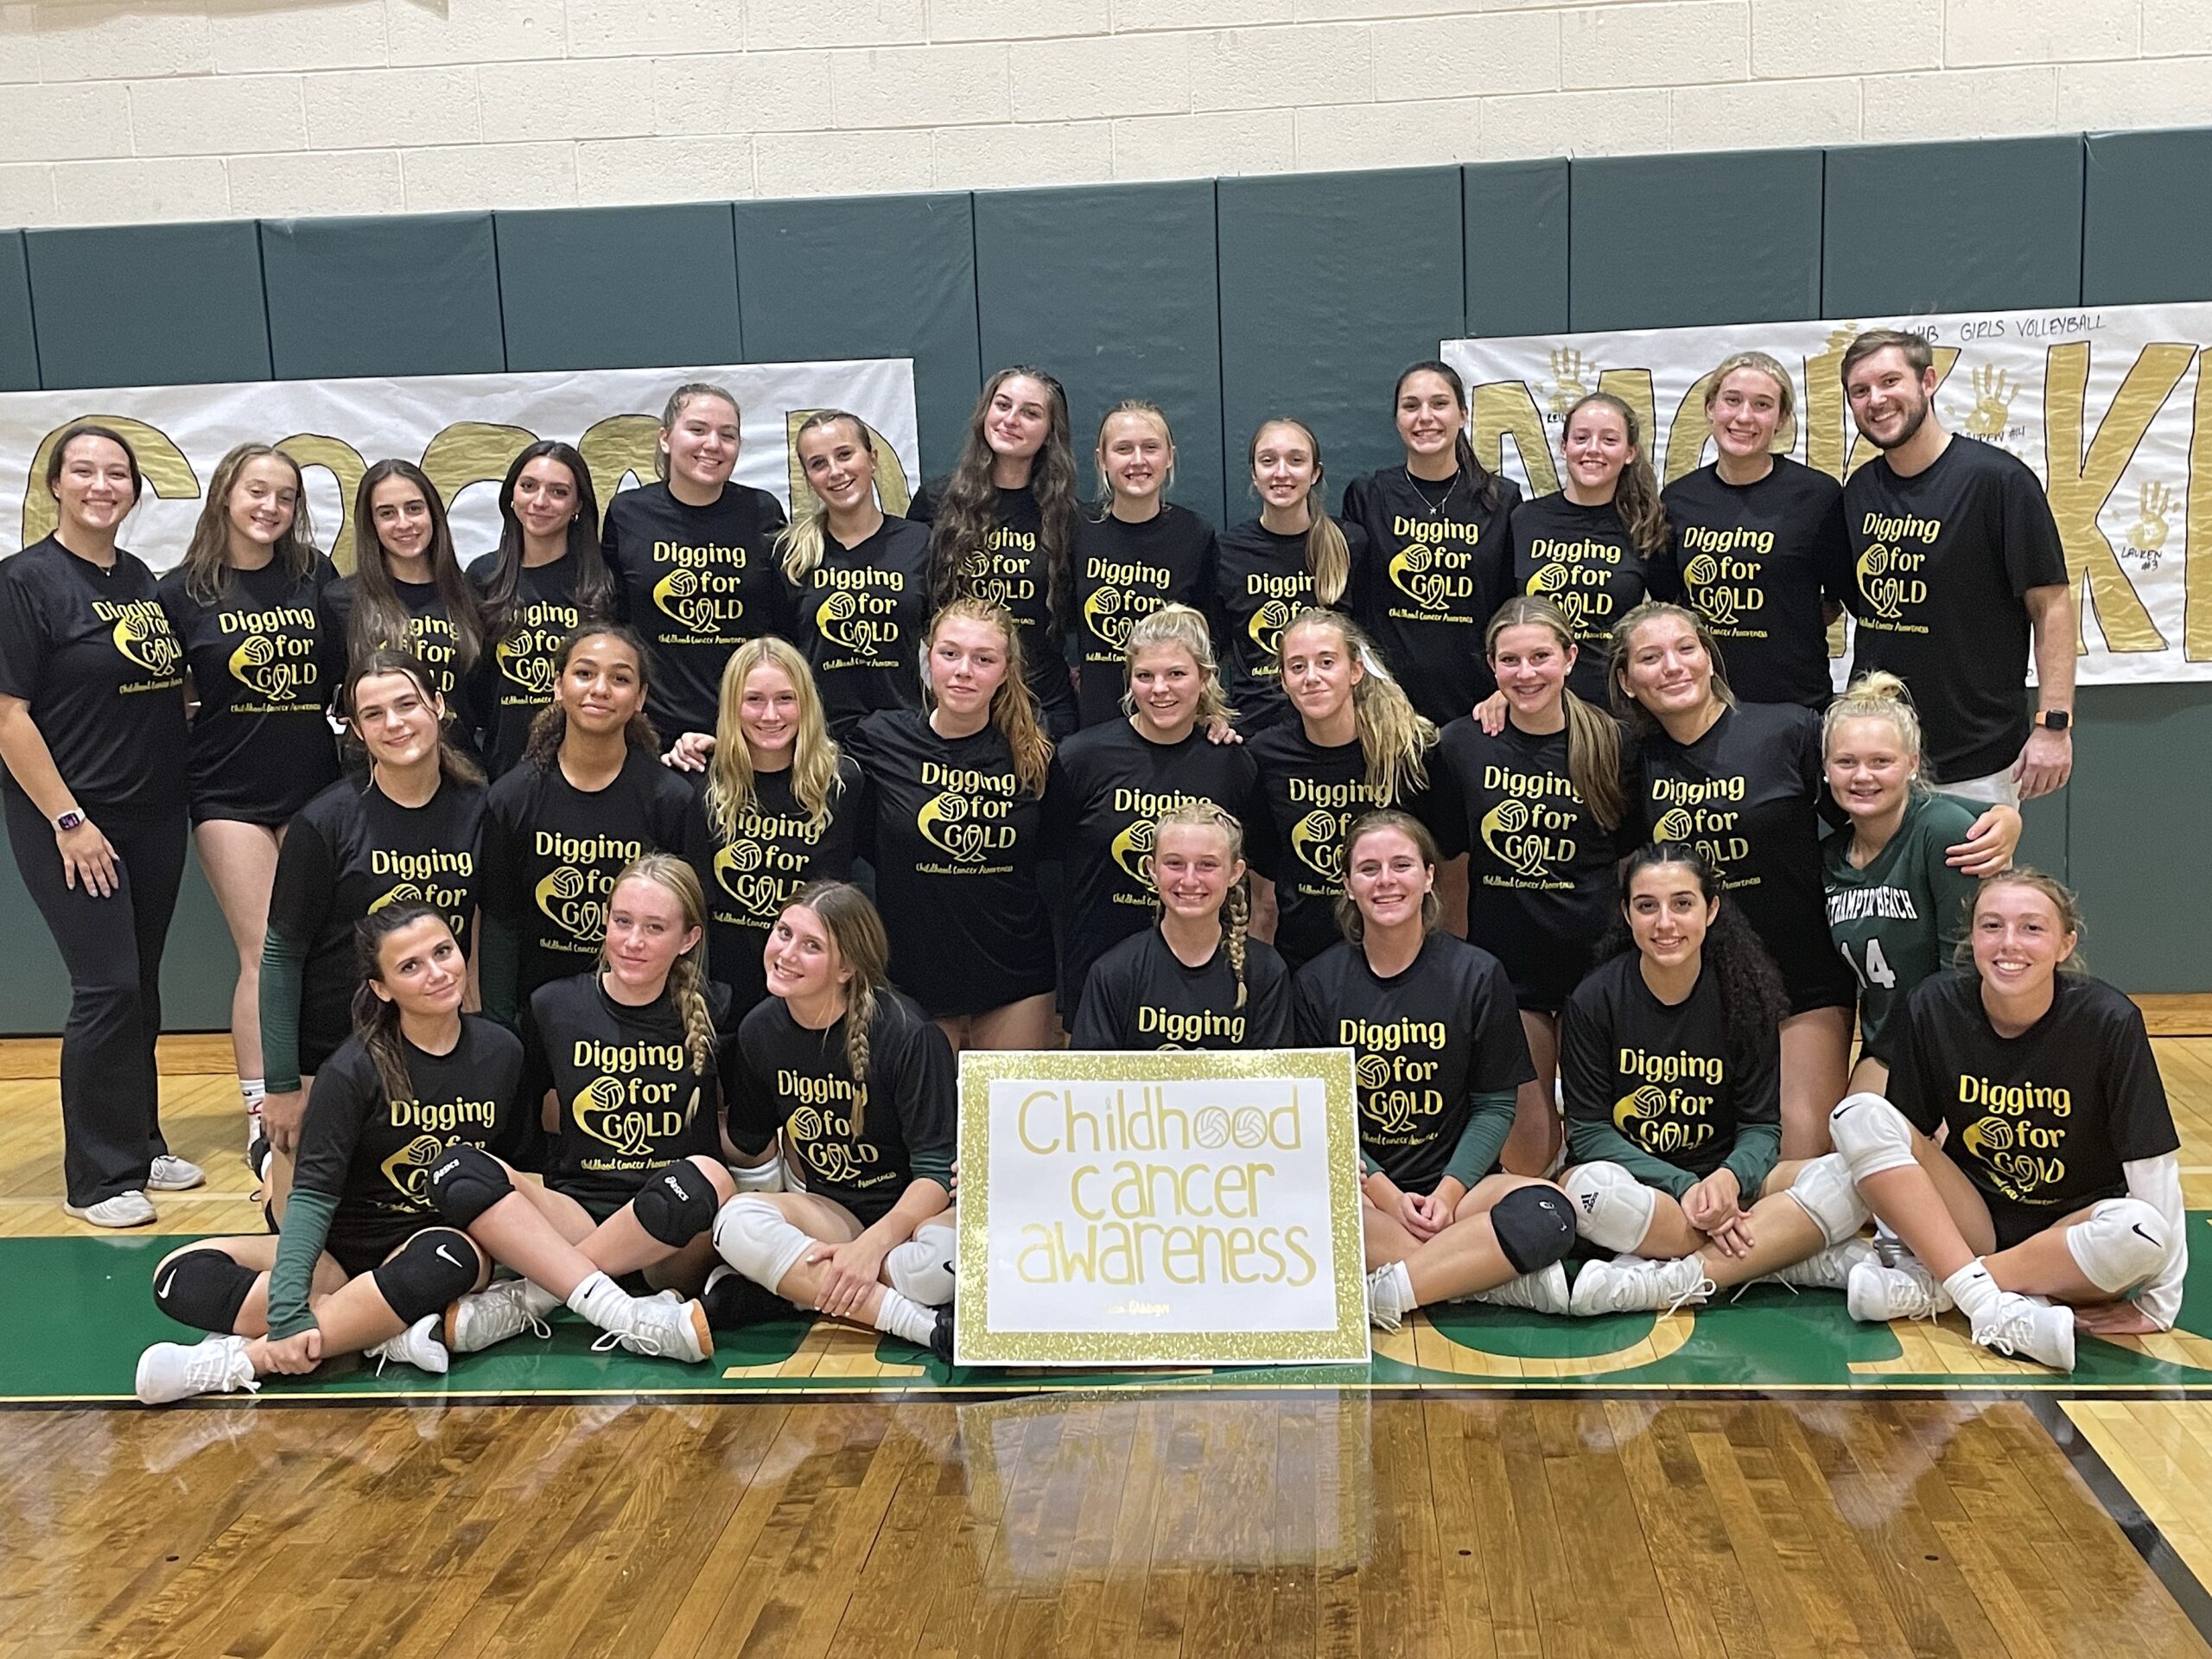 The Westhampton Beach girls junior varsity volleyball team also participated in the 